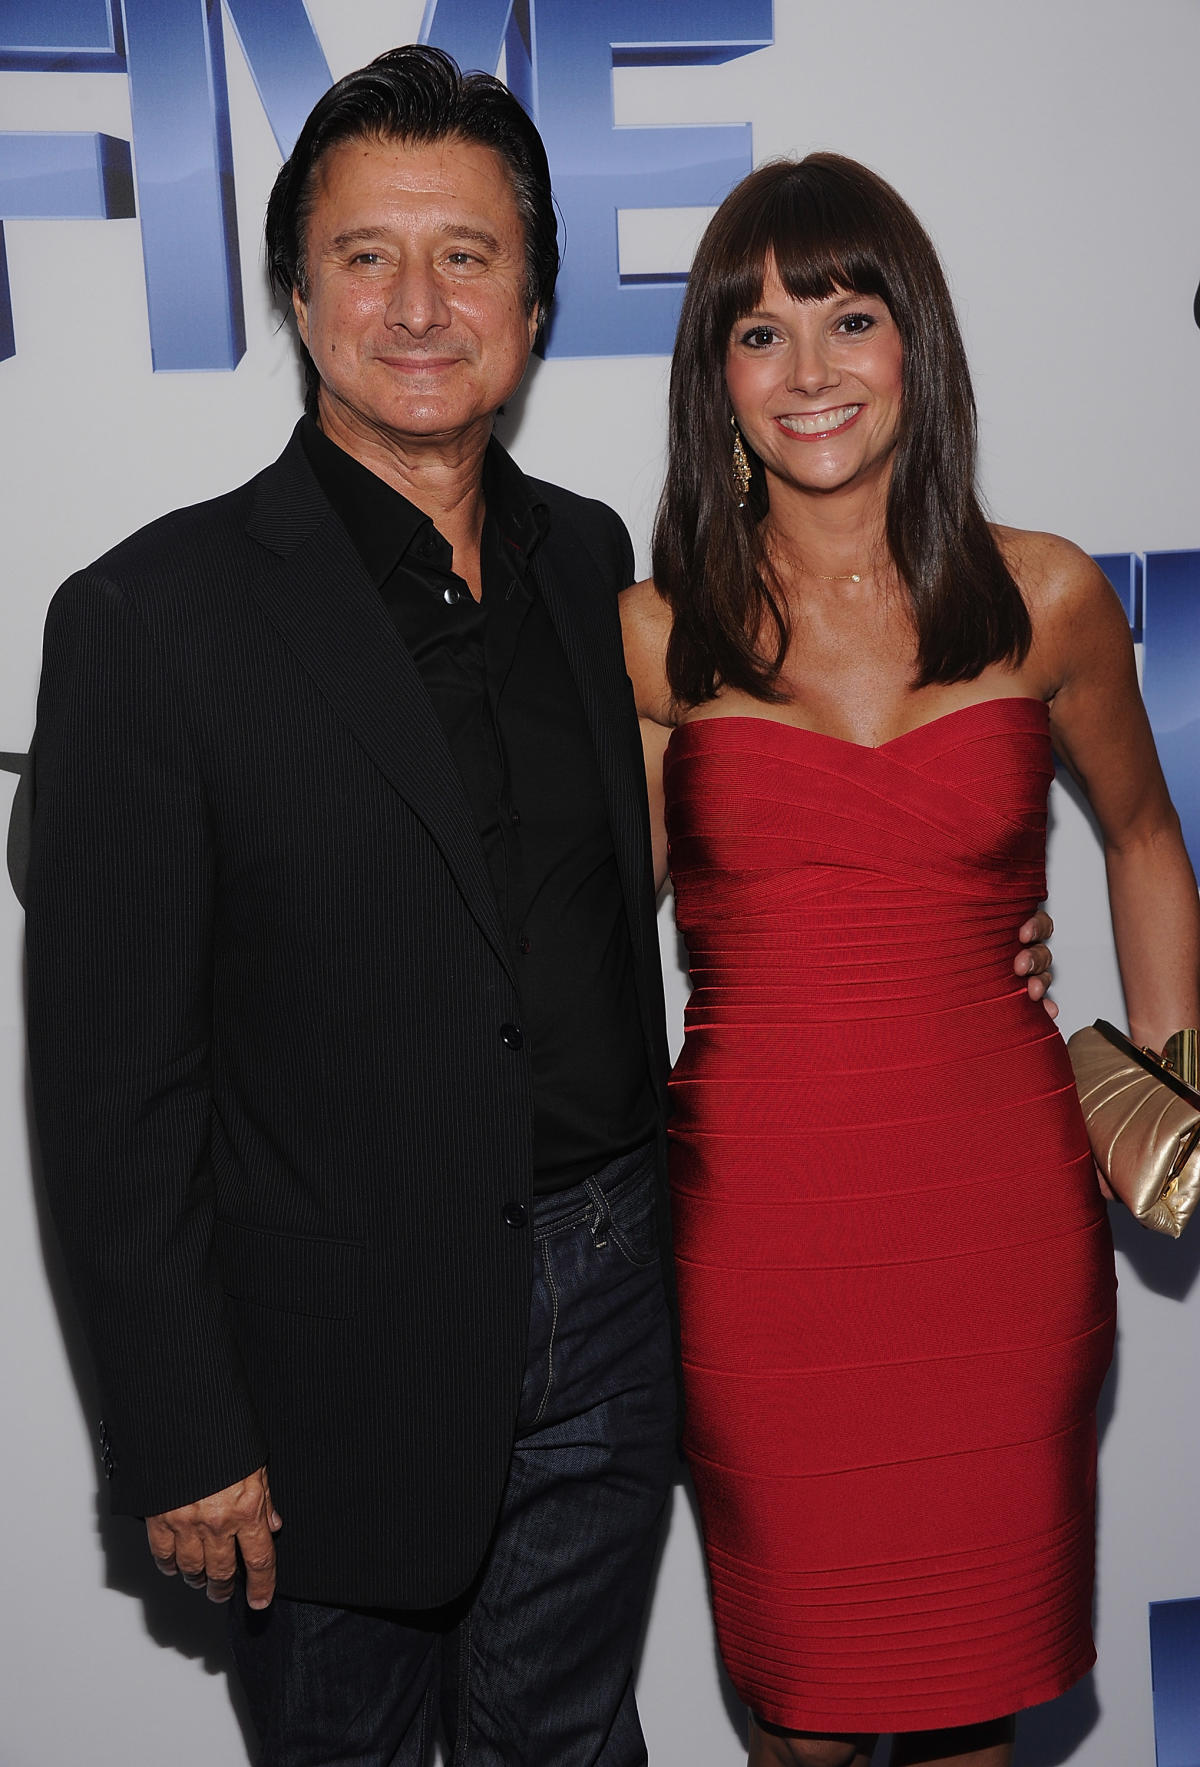 Steve Perry's journey back How one special woman made him start